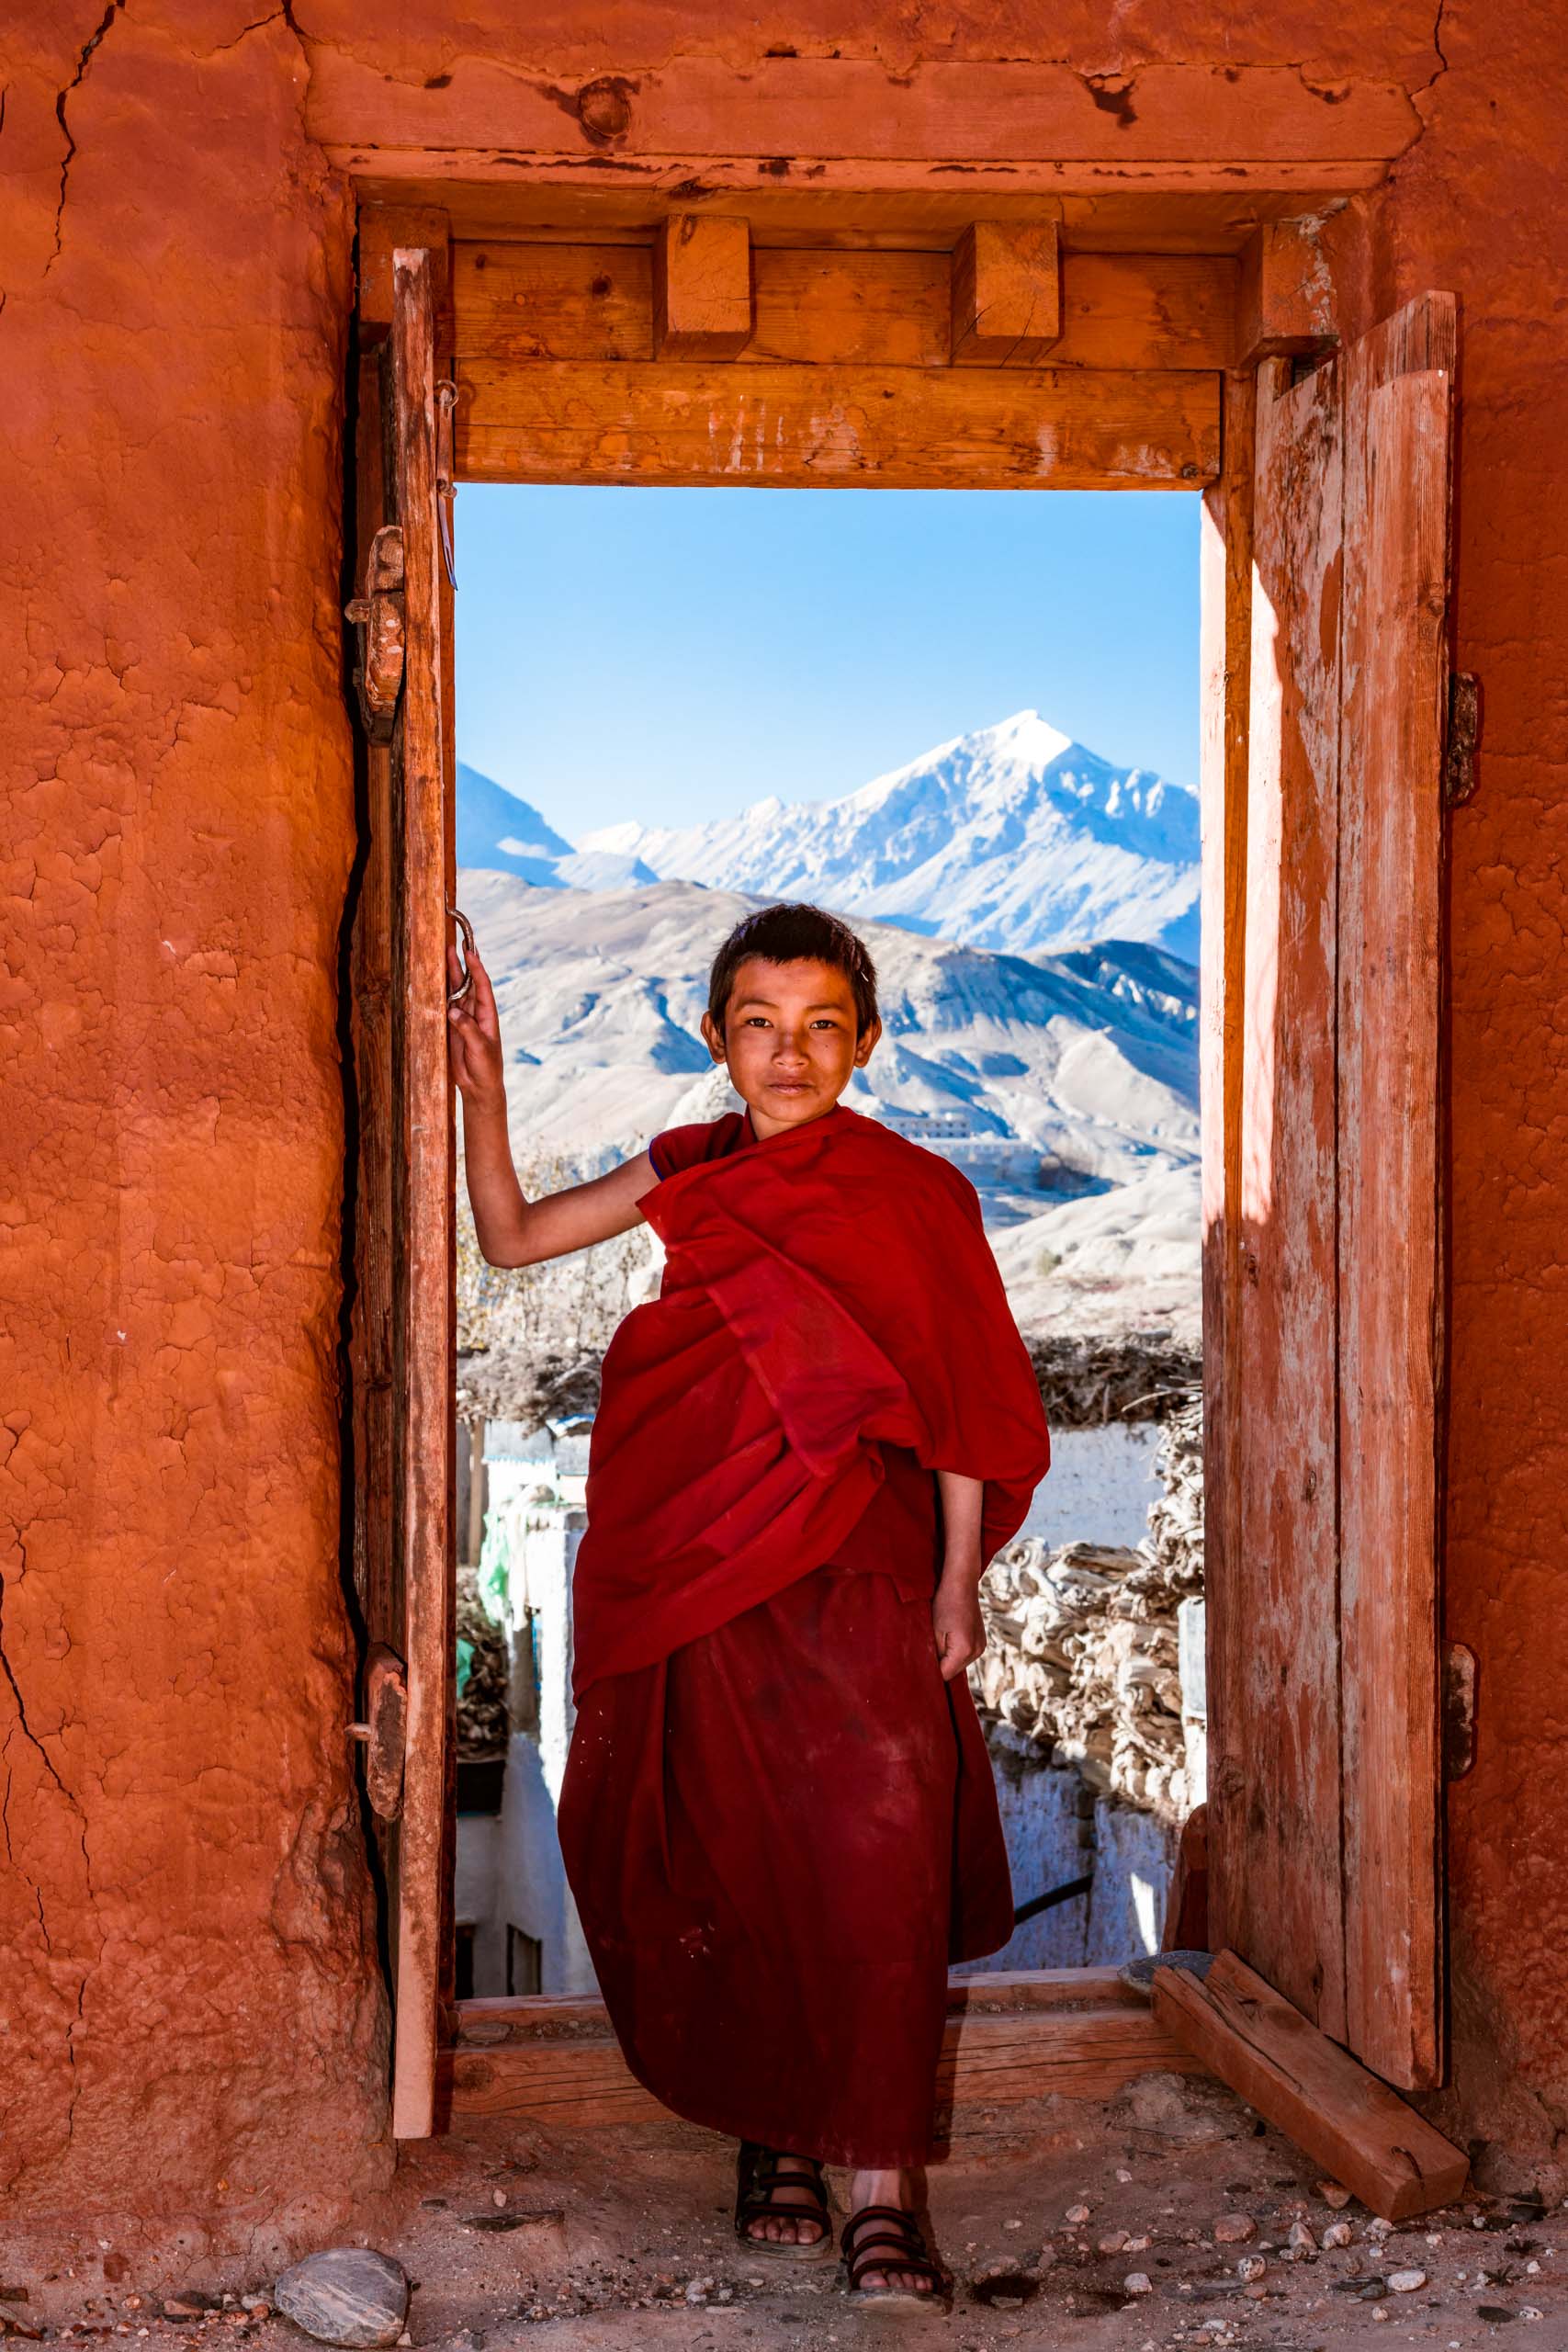 Young novice buddhist monks in the monastery, Lo Manthang, Upper Mustang region, Nepal.